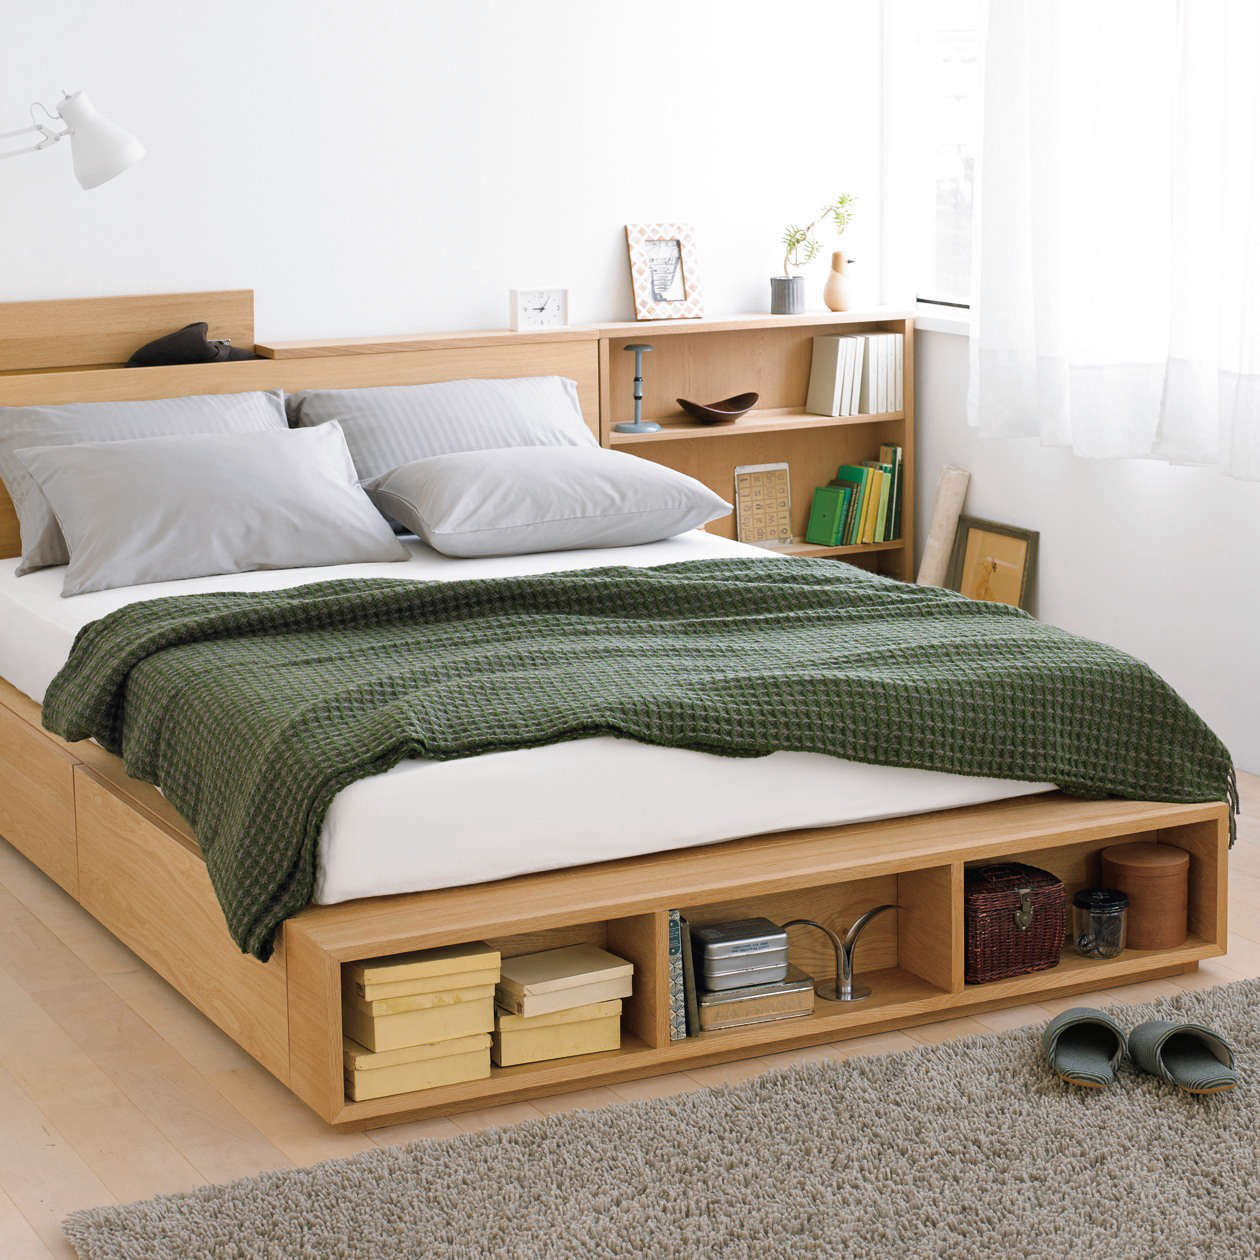 10 Easy Pieces Storage Beds Remodelista, Bed Frame With Drawers And Headboard